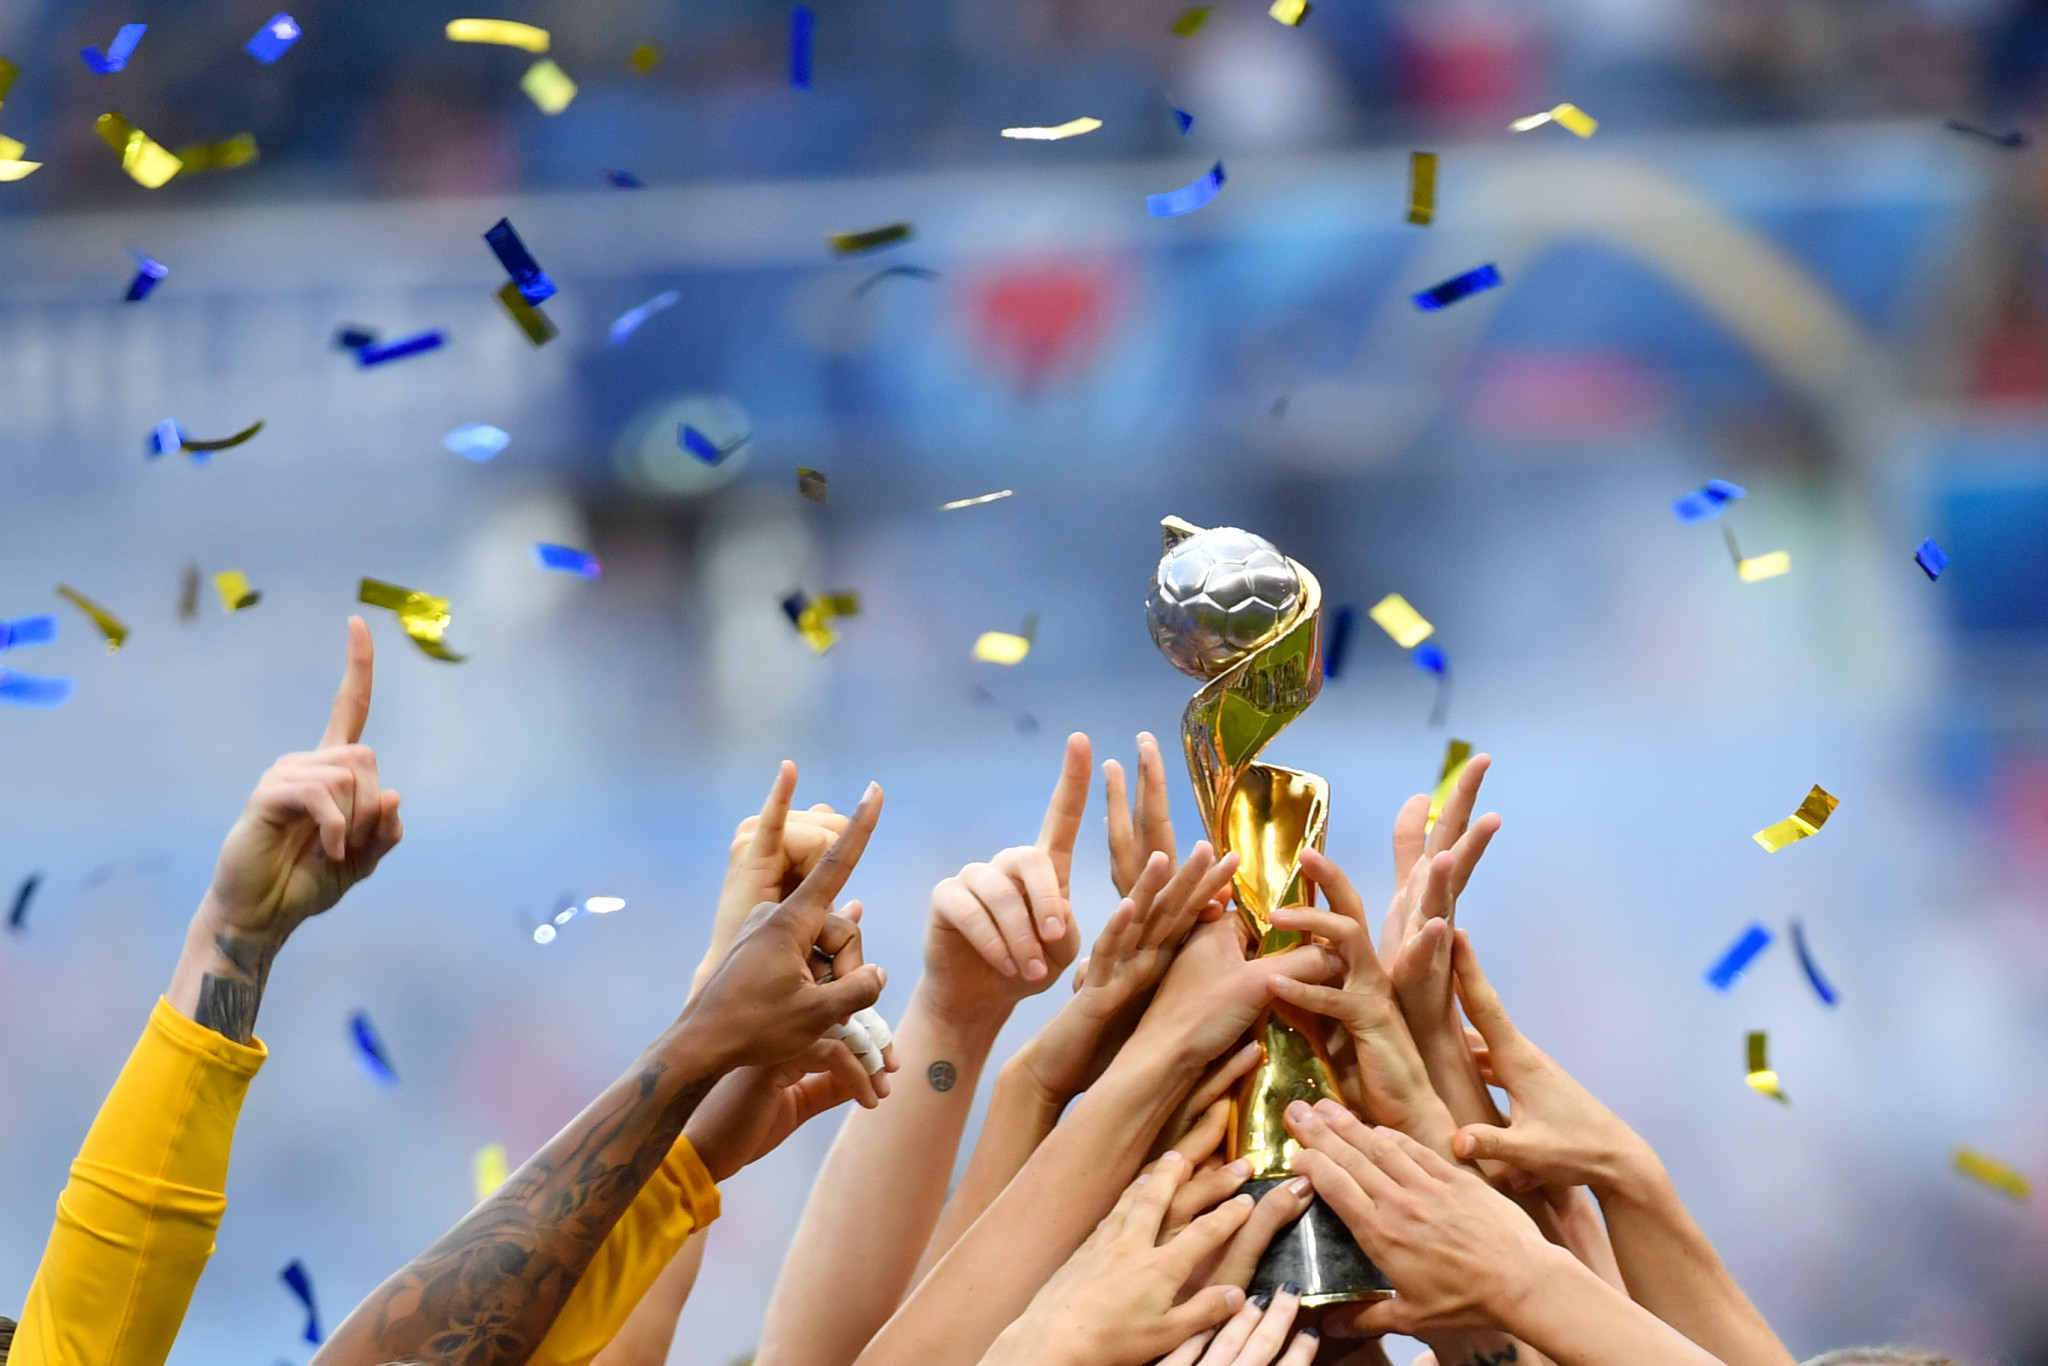 Inter Rapidísimo named as official supporter of 2023 FIFA Women's World Cup